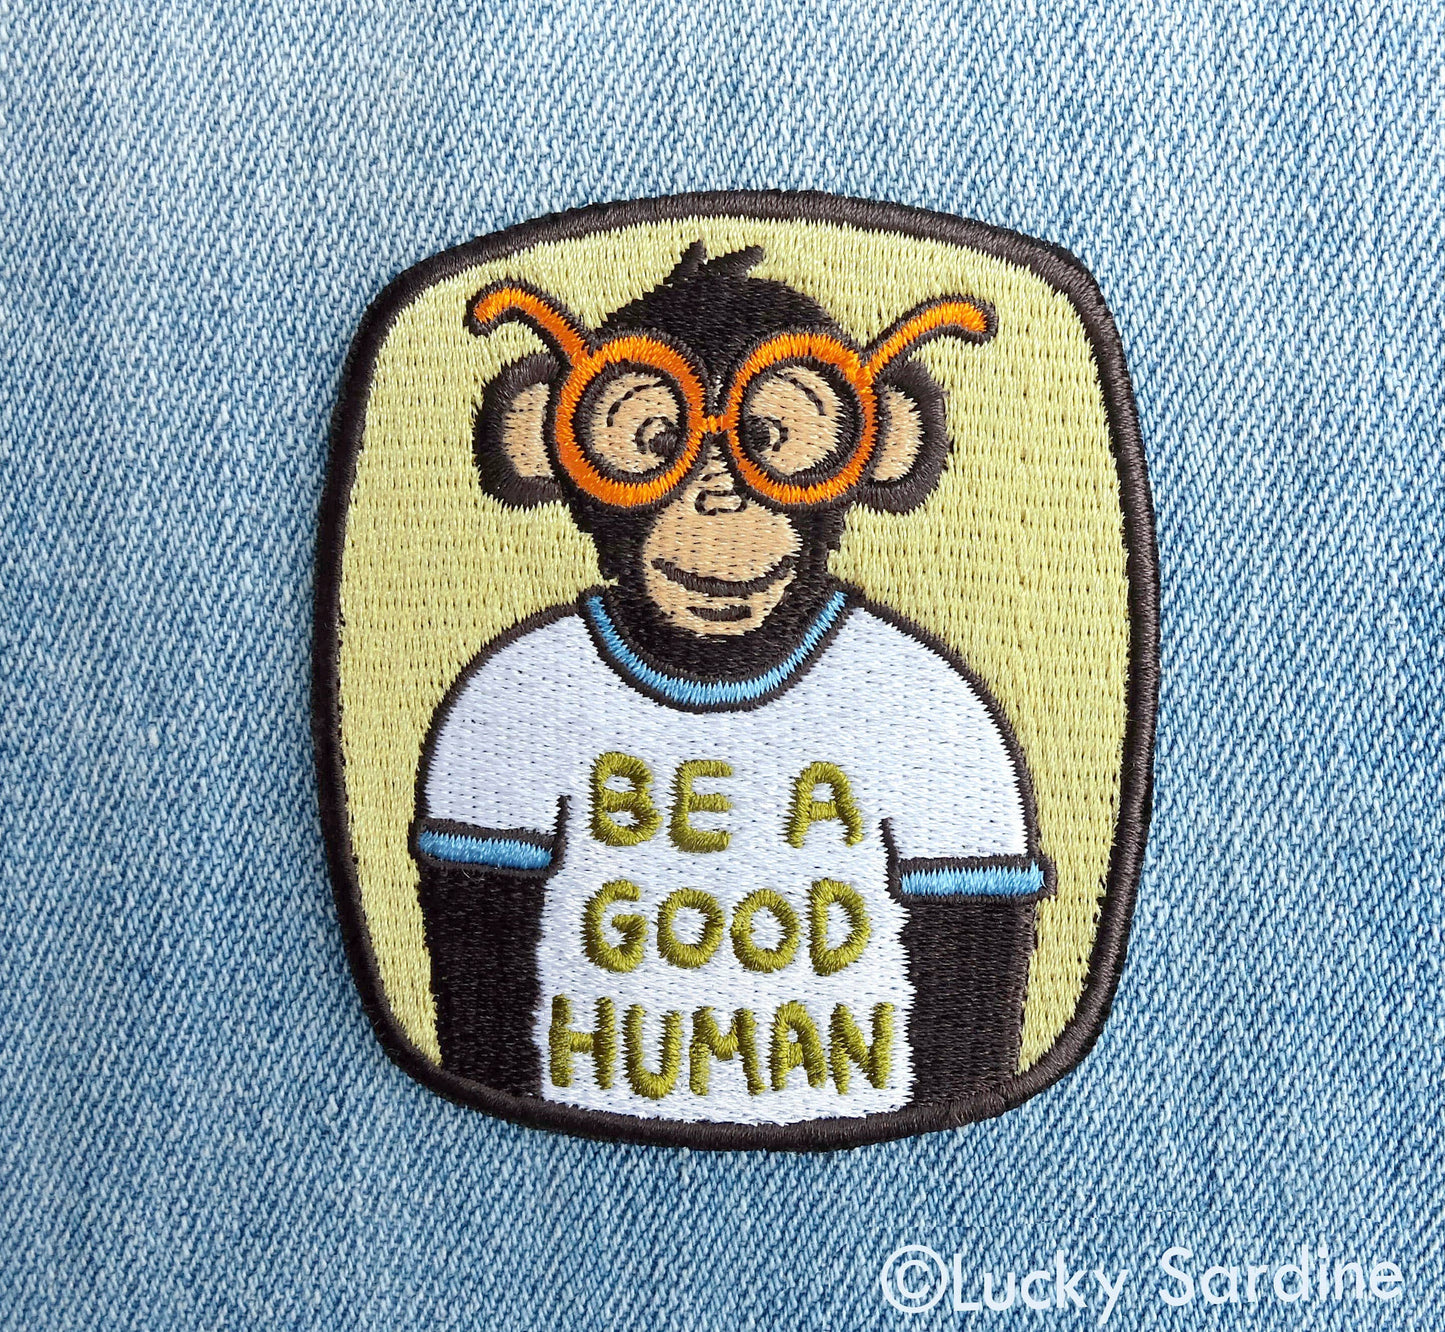 BE A GOOD HUMAN, Ape Chimpanzee Embroidered Patch